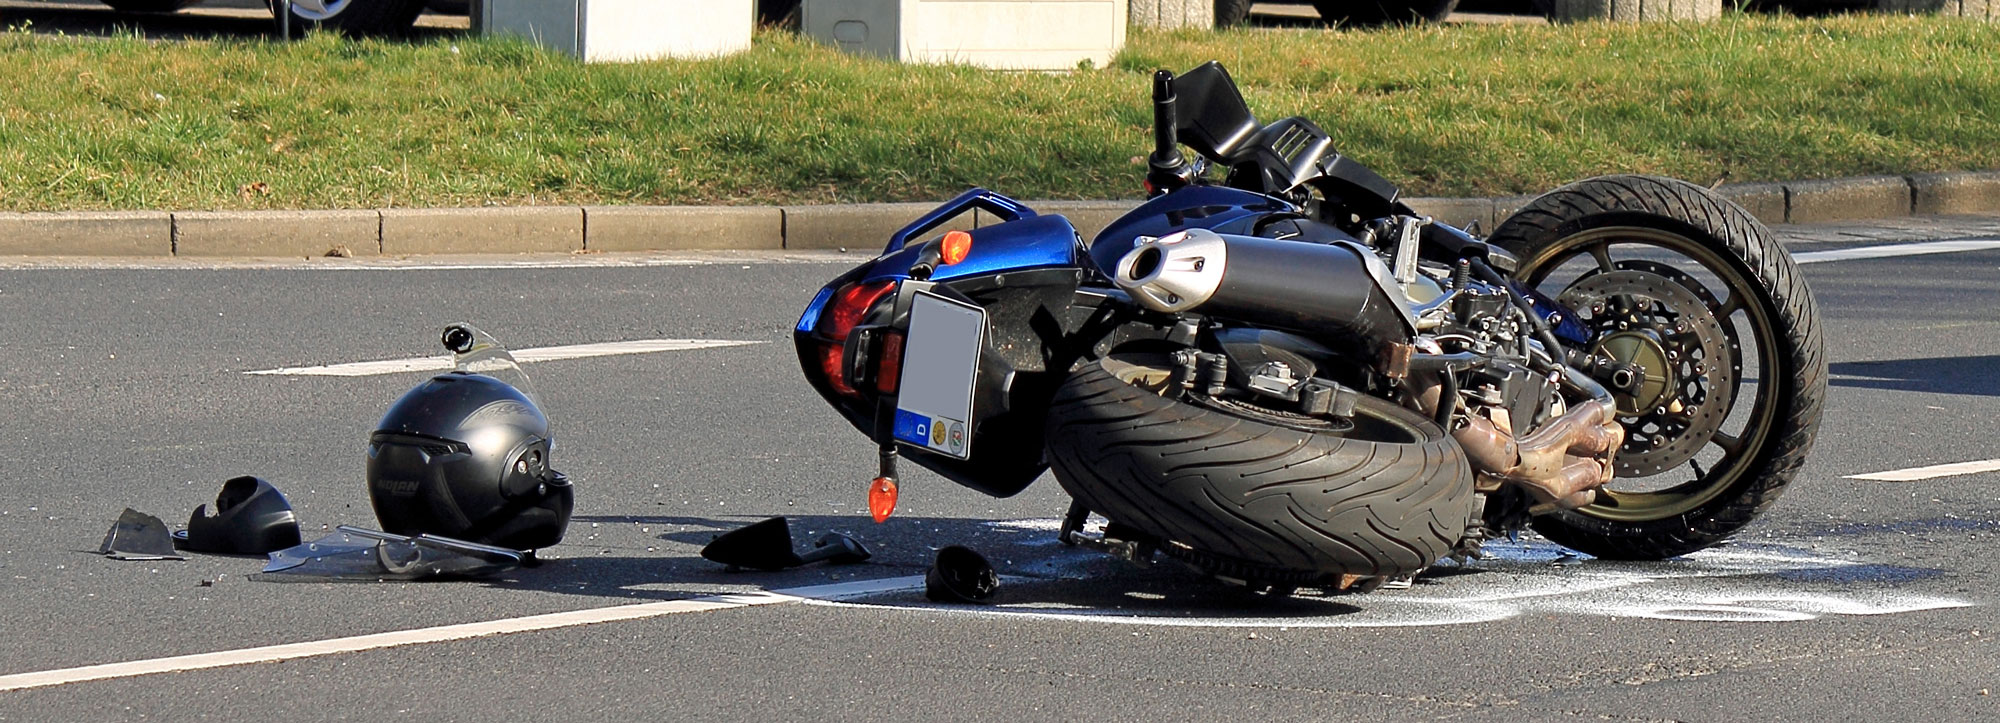 Expert Experienced Motorcycle Crash Law Firm in Minnesota | 612 Injured